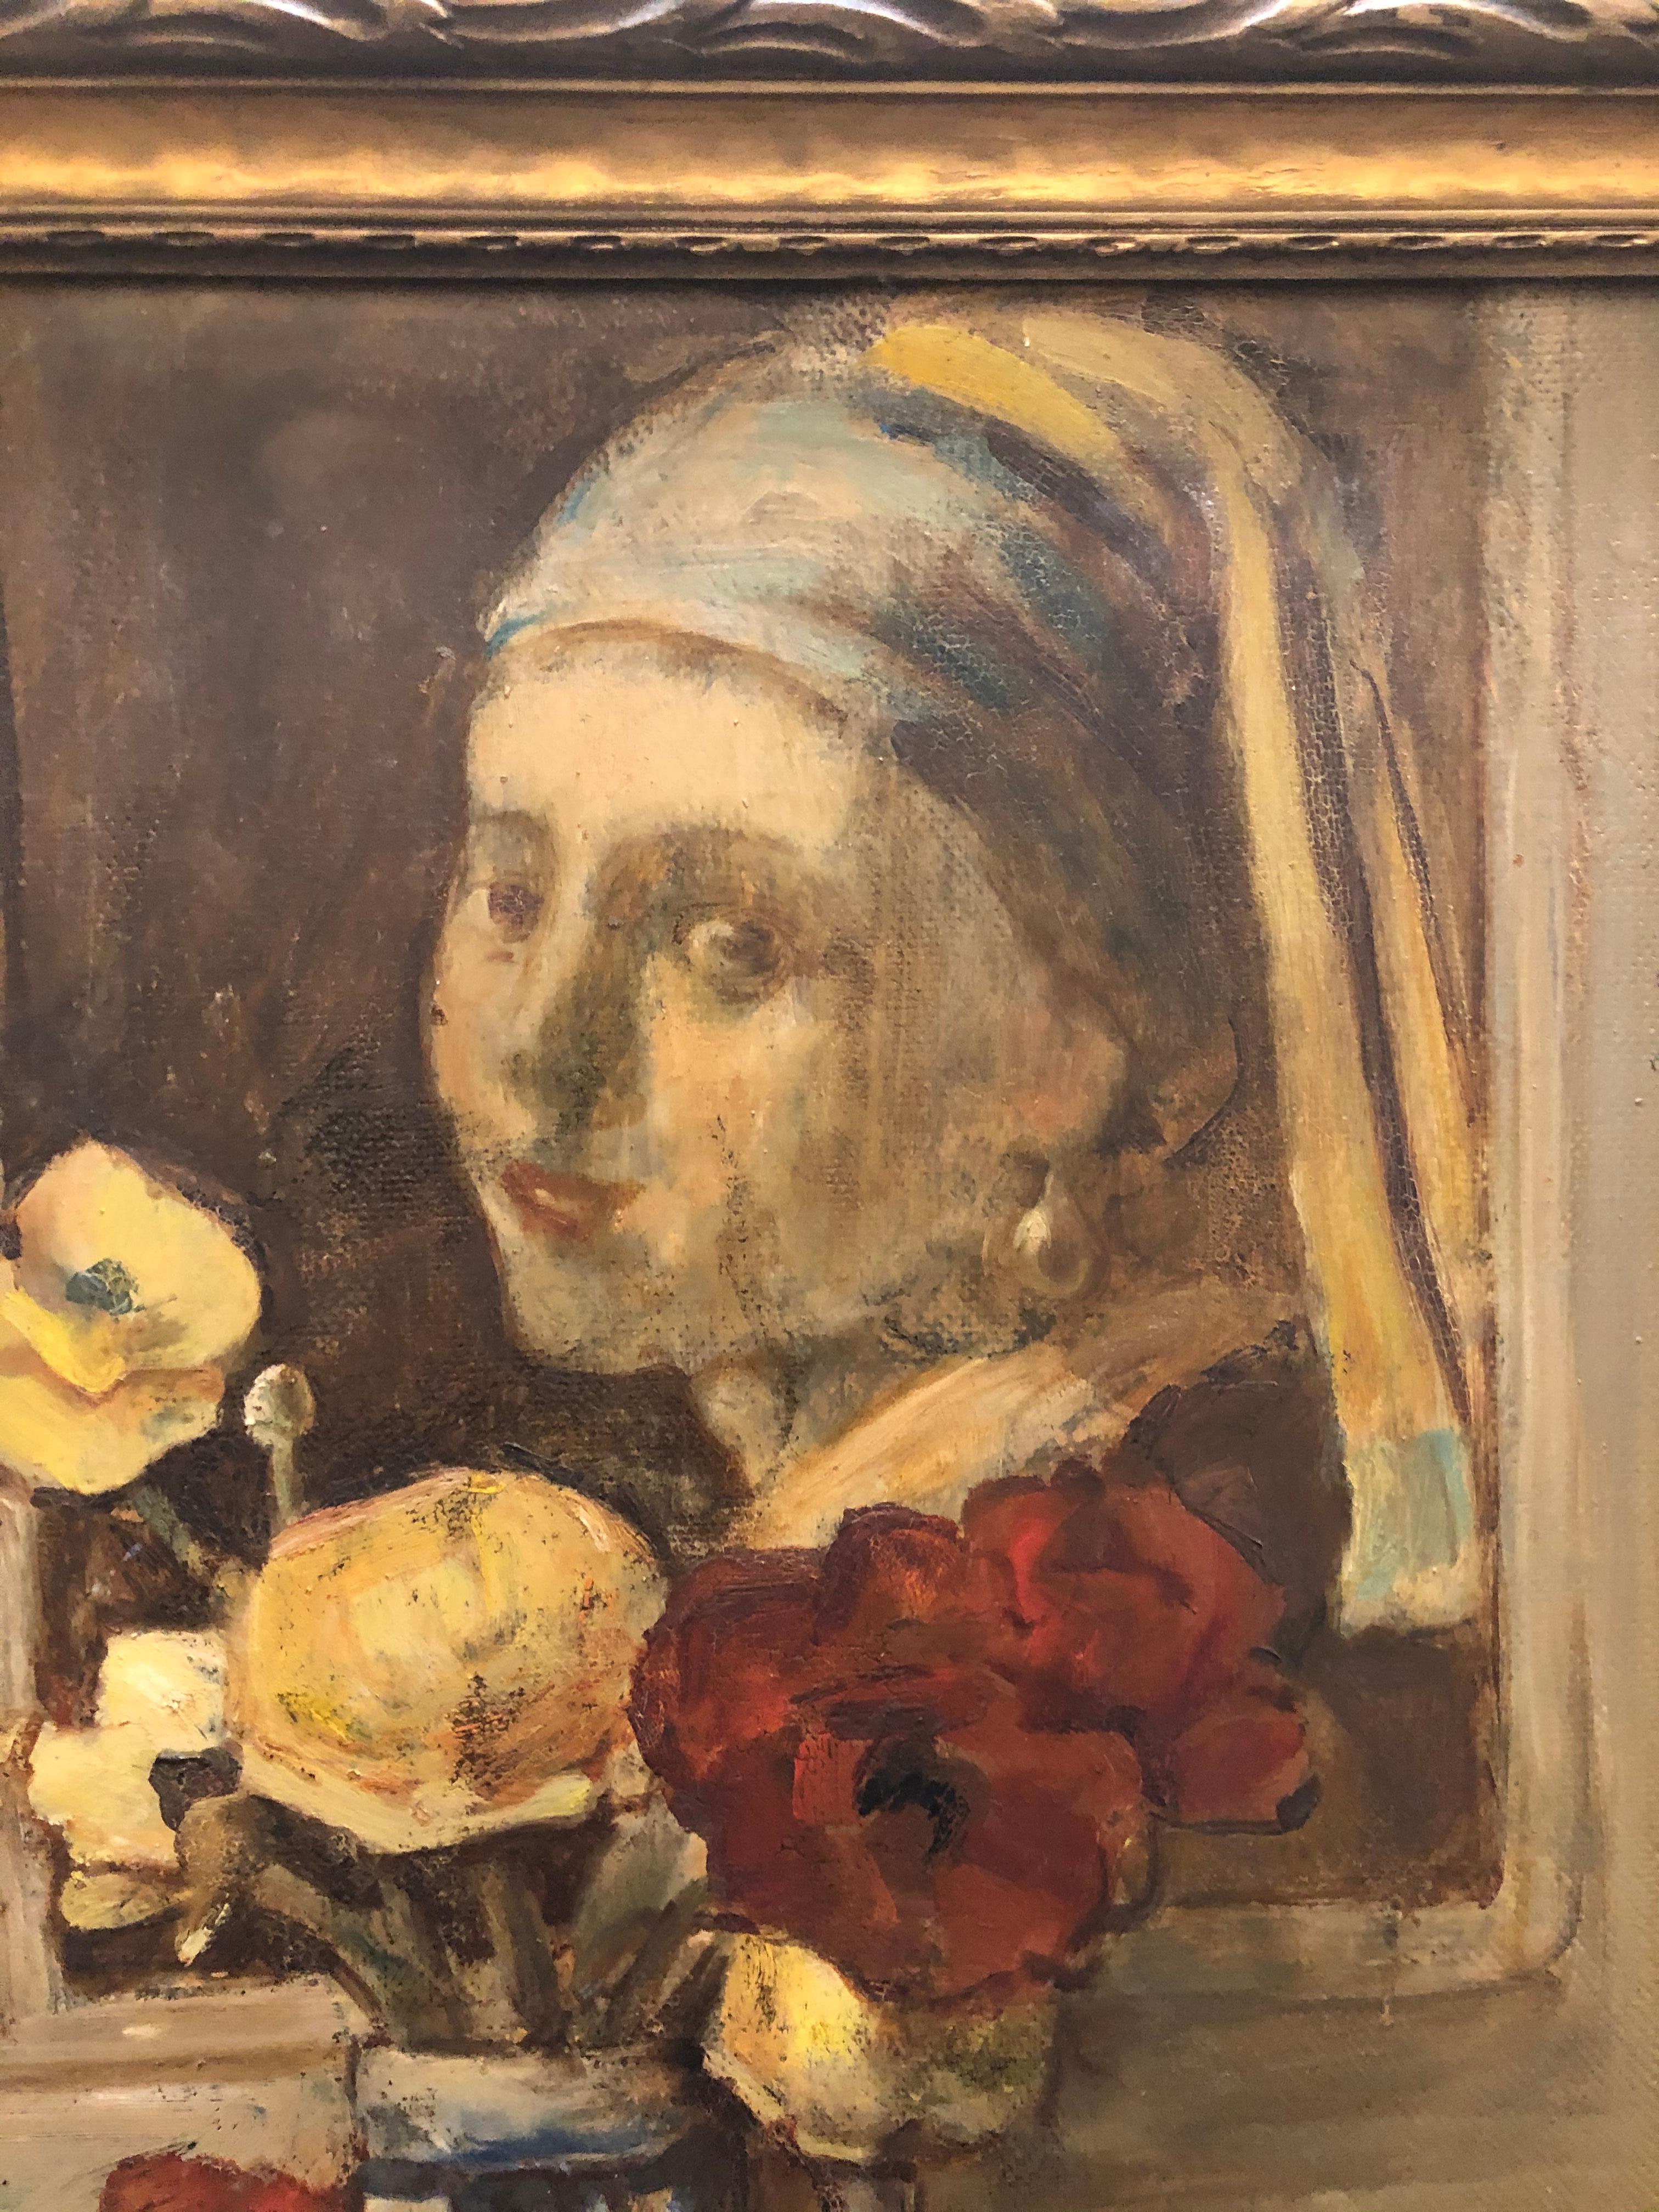 Clarence Keiser Hinkle: 1880-1960. Well listed California artist with Auction records up to $76,000 but sells for much more in galleries. This fabulous fresh to the market oil on masonite seems to be Hinkle’s homage to Vermeers famous painting of